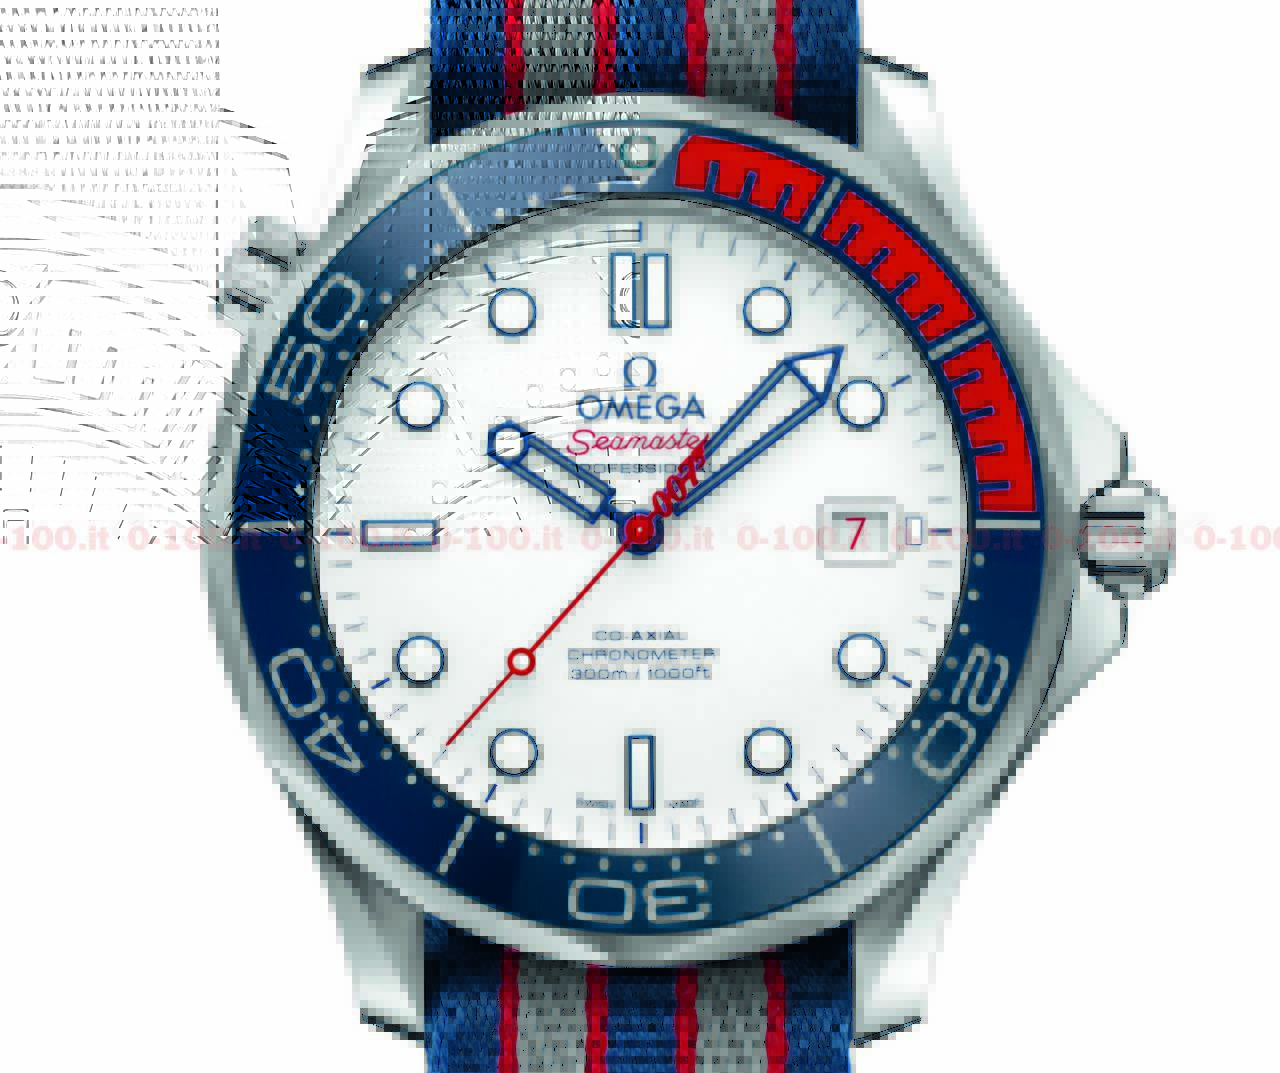 Omega Seamaster Diver 300M “Commander’s Watch” Limited Edition_0-1004